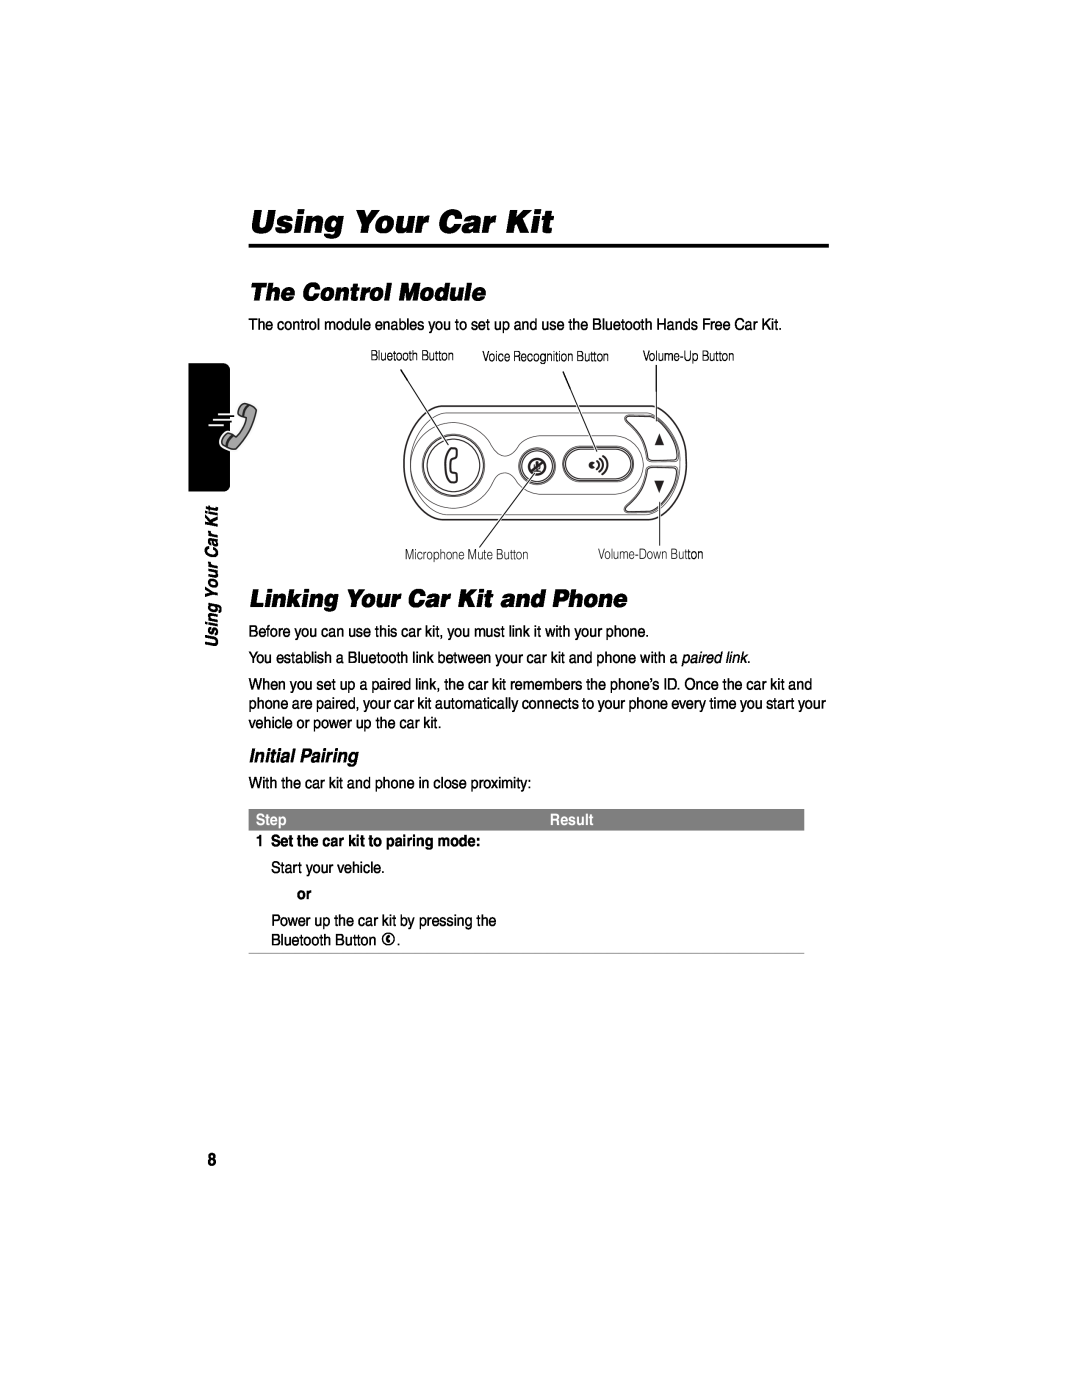 Motorola 89589N Using Your Car Kit, The Control Module, Linking Your Car Kit and Phone, Initial Pairing, Step, Result 